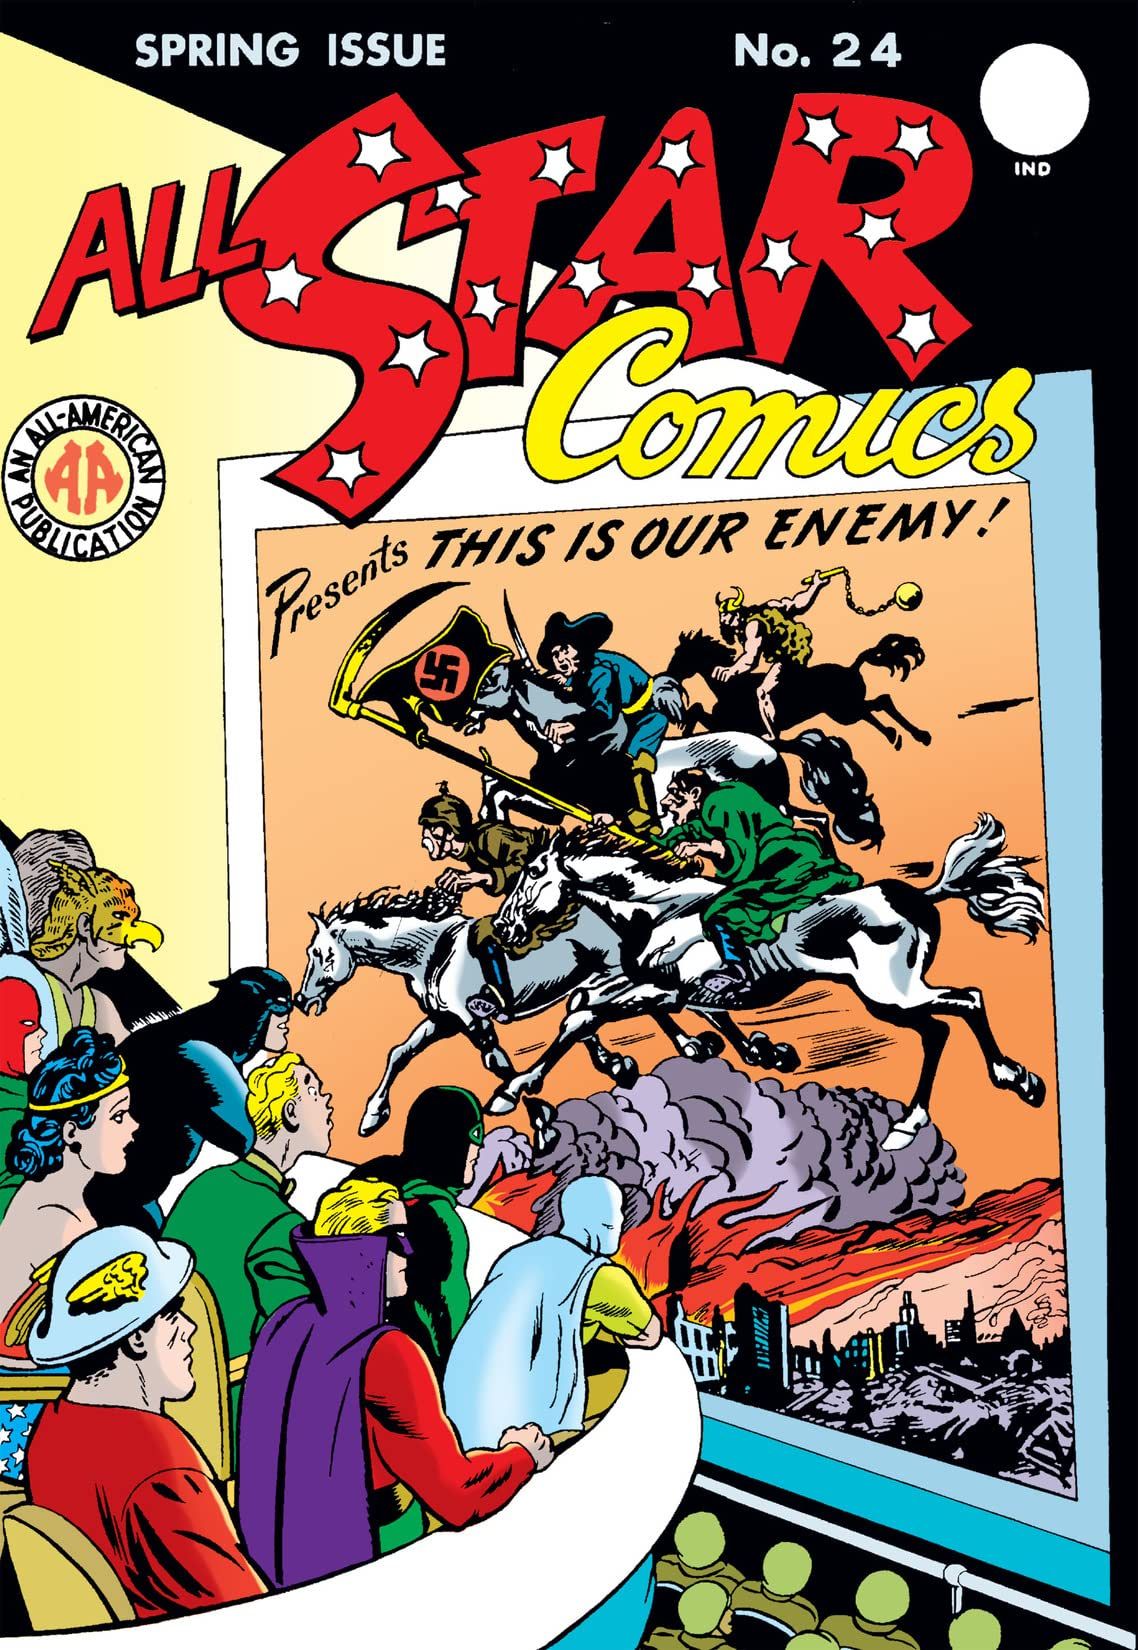 Justice Society on the cover of All-Star Comics #16